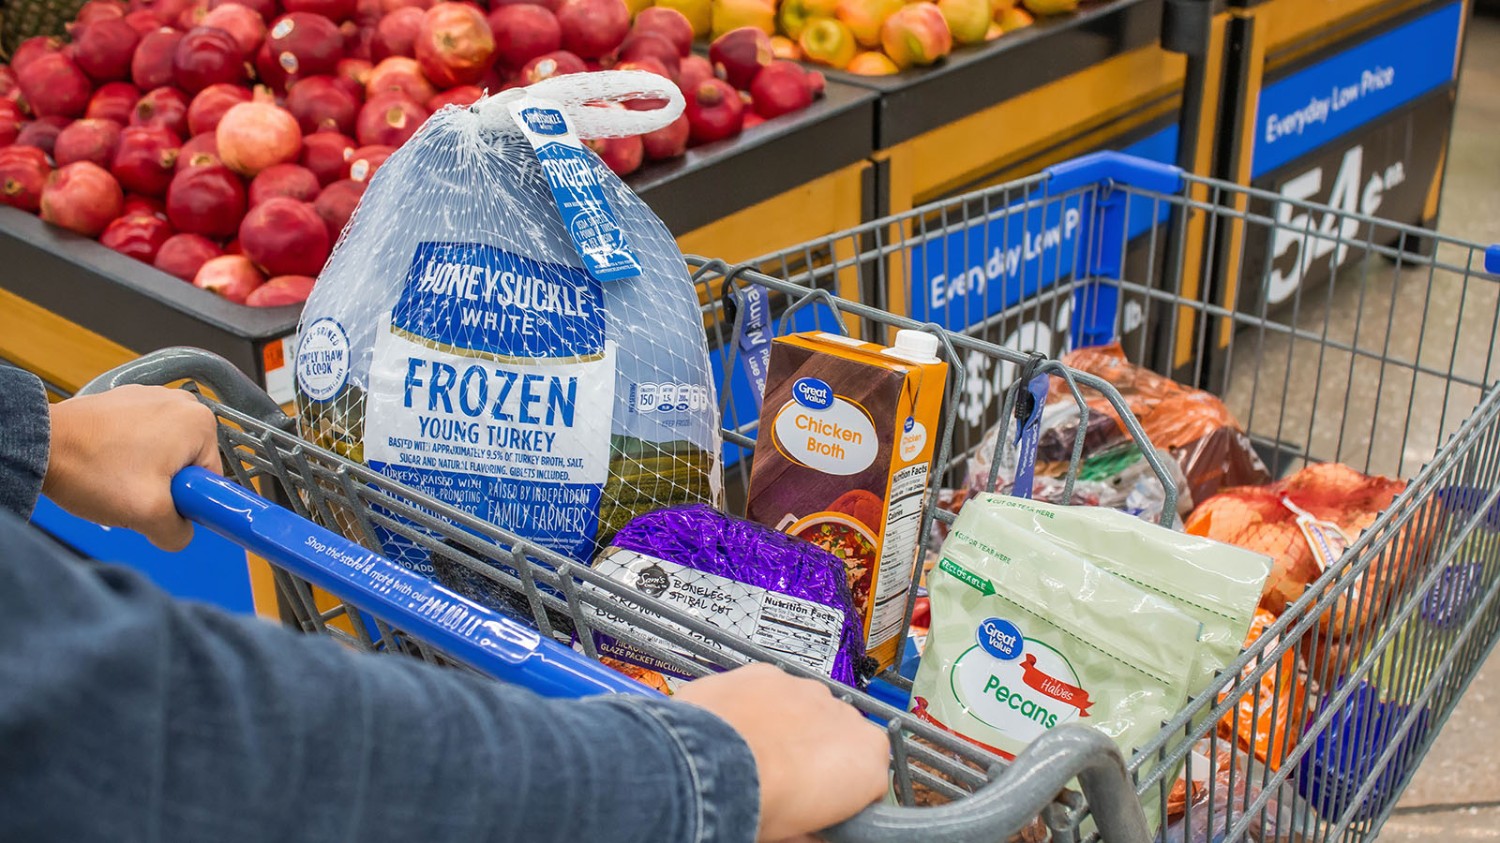 https://corporate.walmart.com/content/corporate/en_us/news/2022/11/03/walmart-is-helping-customers-set-the-table-this-holiday-season-with-this-years-thanksgiving-meal-at-last-years-price/jcr:content/newsimage.img.jpg/1693432356471.jpg